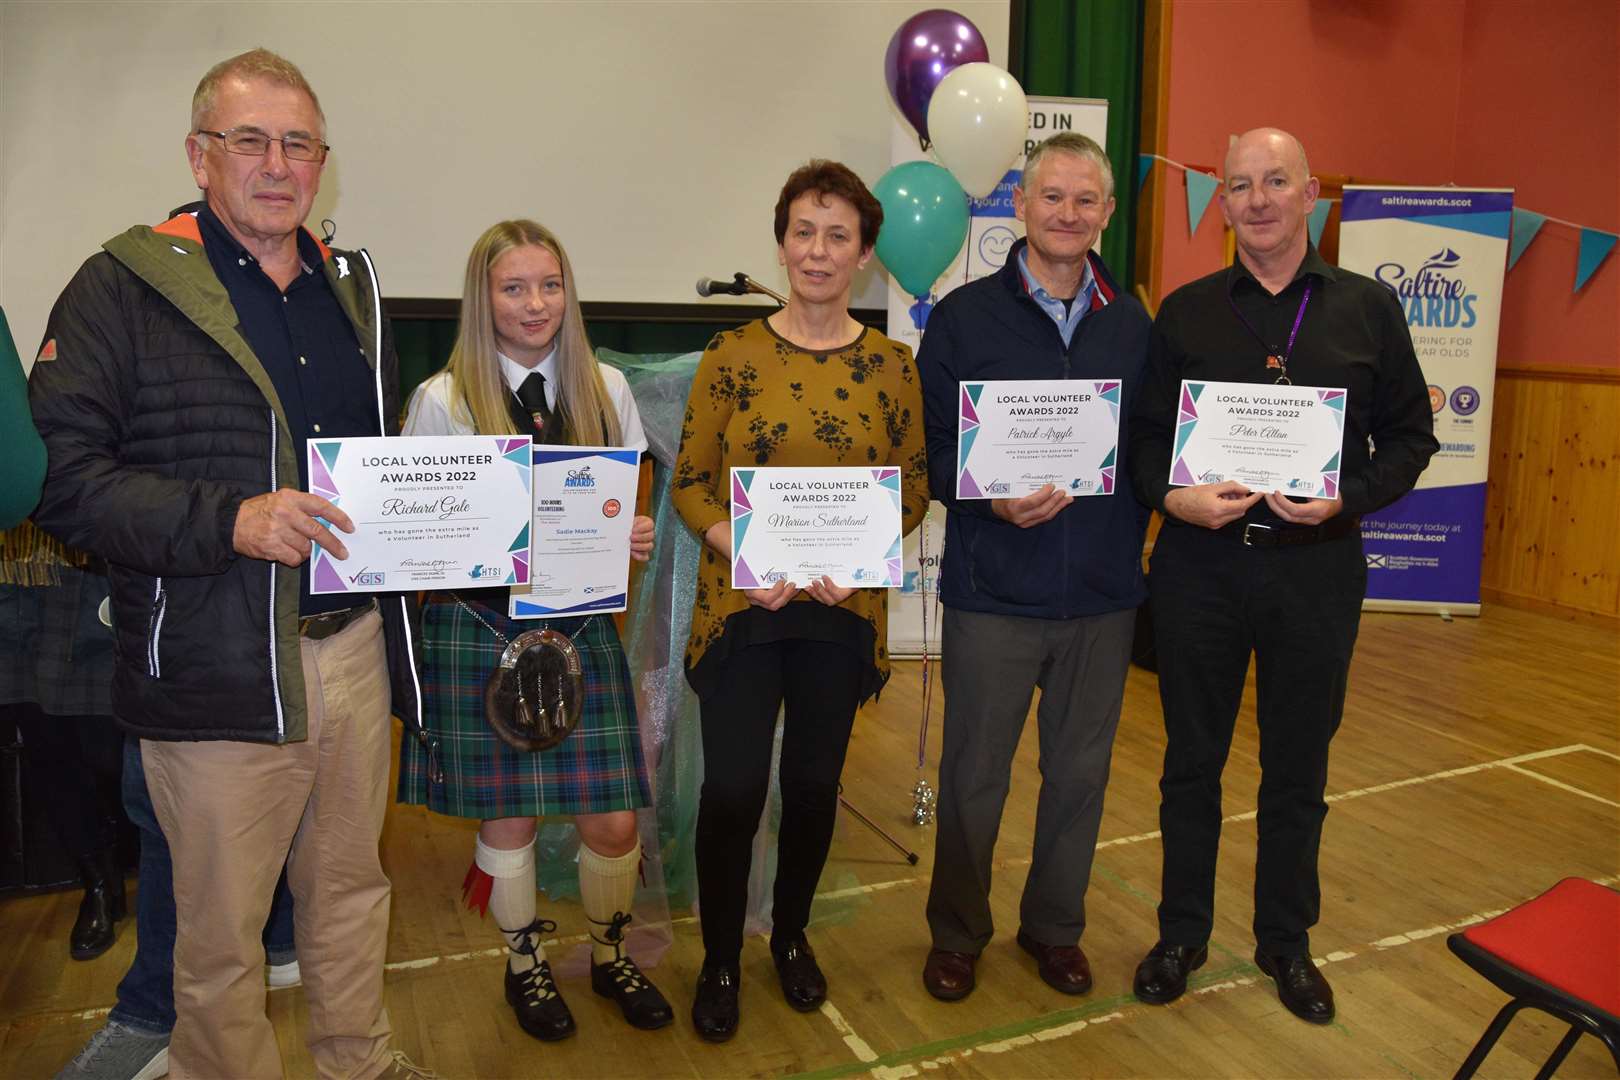 The Go Golspie team, from left, Richard Gale, Sadie Mackay, Marion Sutherland, Patrick Argyle and Peter Allan.